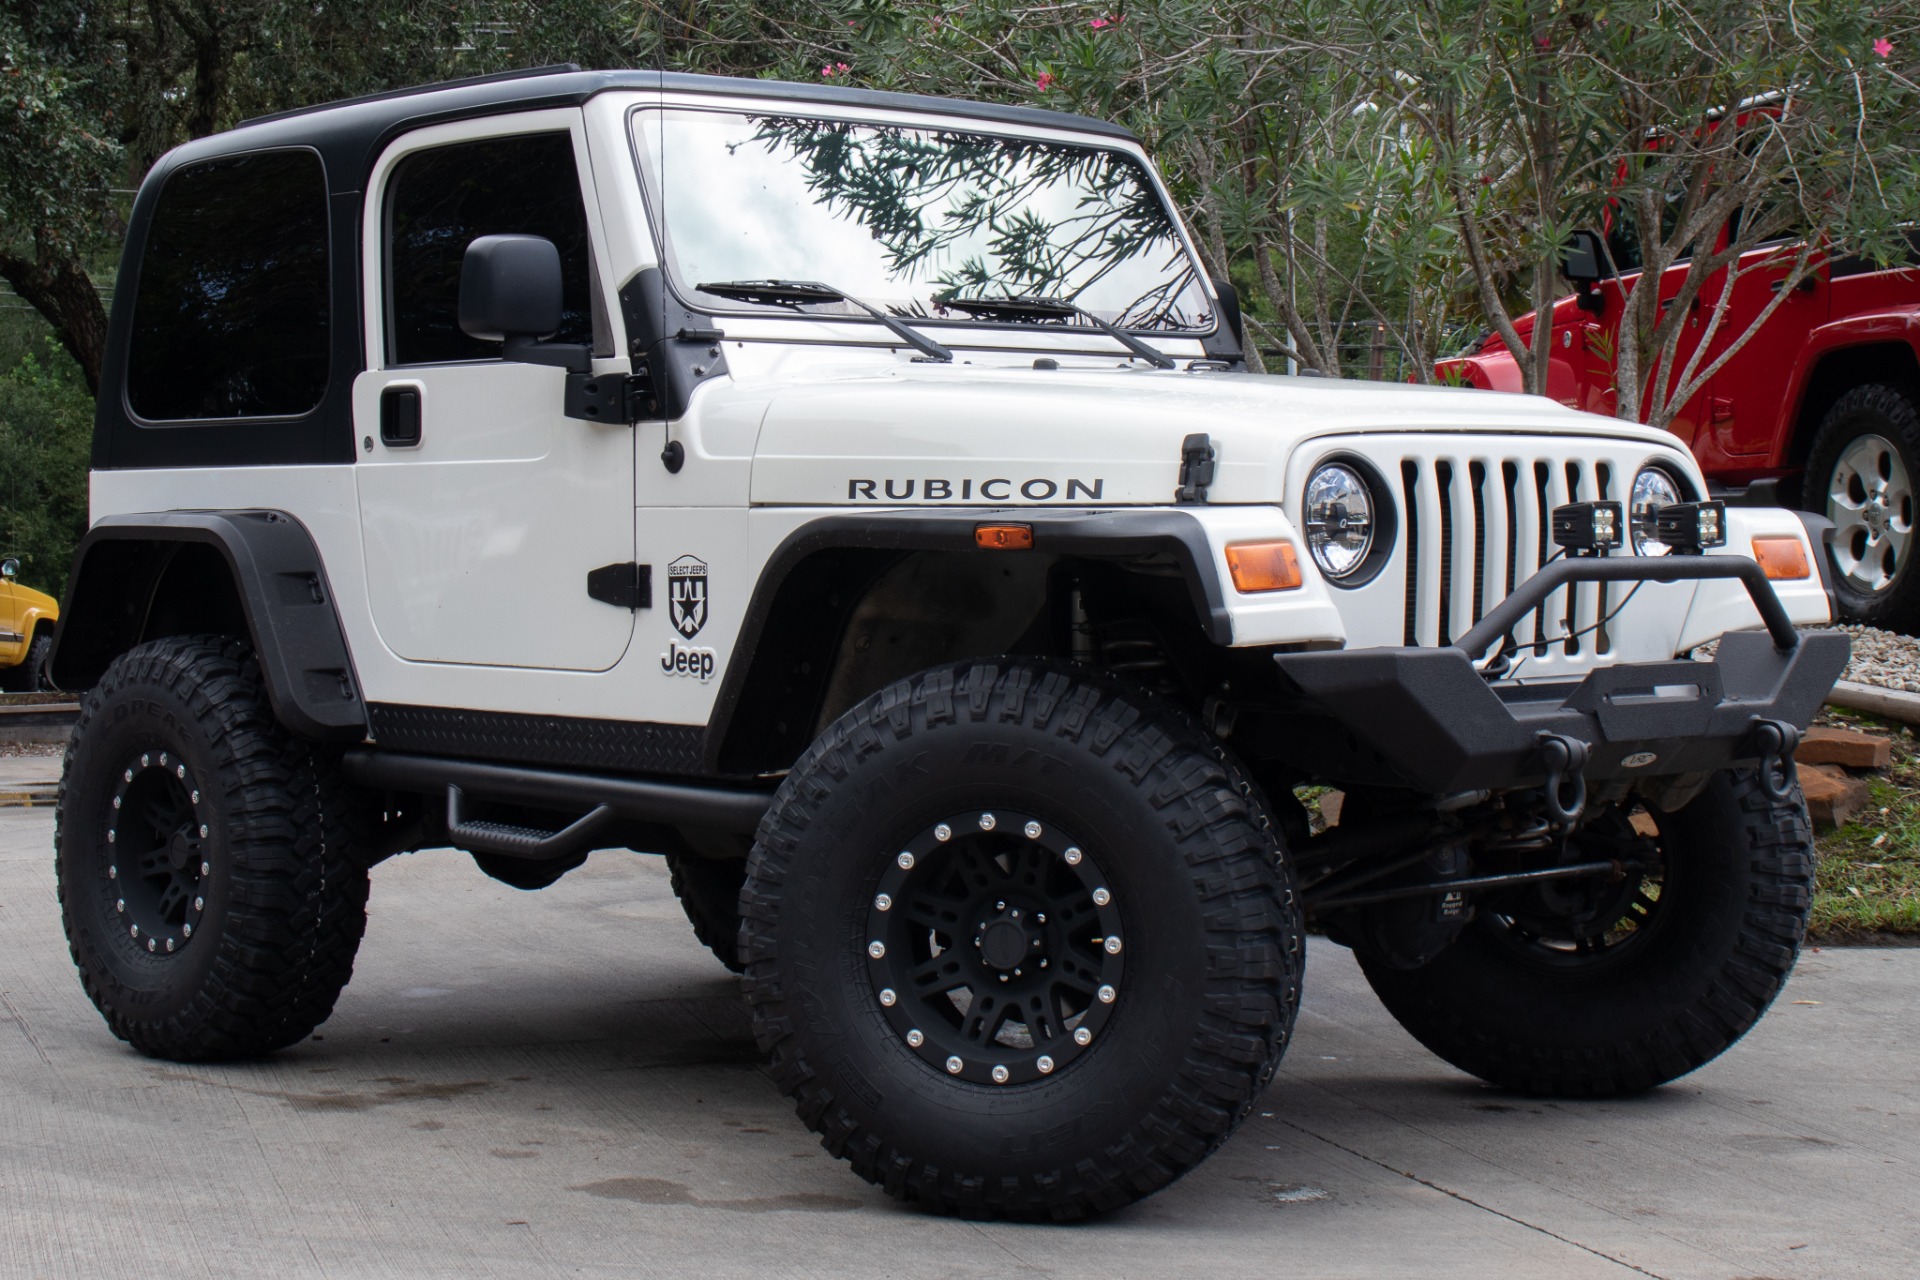 Used 2004 Jeep Wrangler Rubicon For Sale ($18,995) | Select Jeeps Inc.  Stock #736251